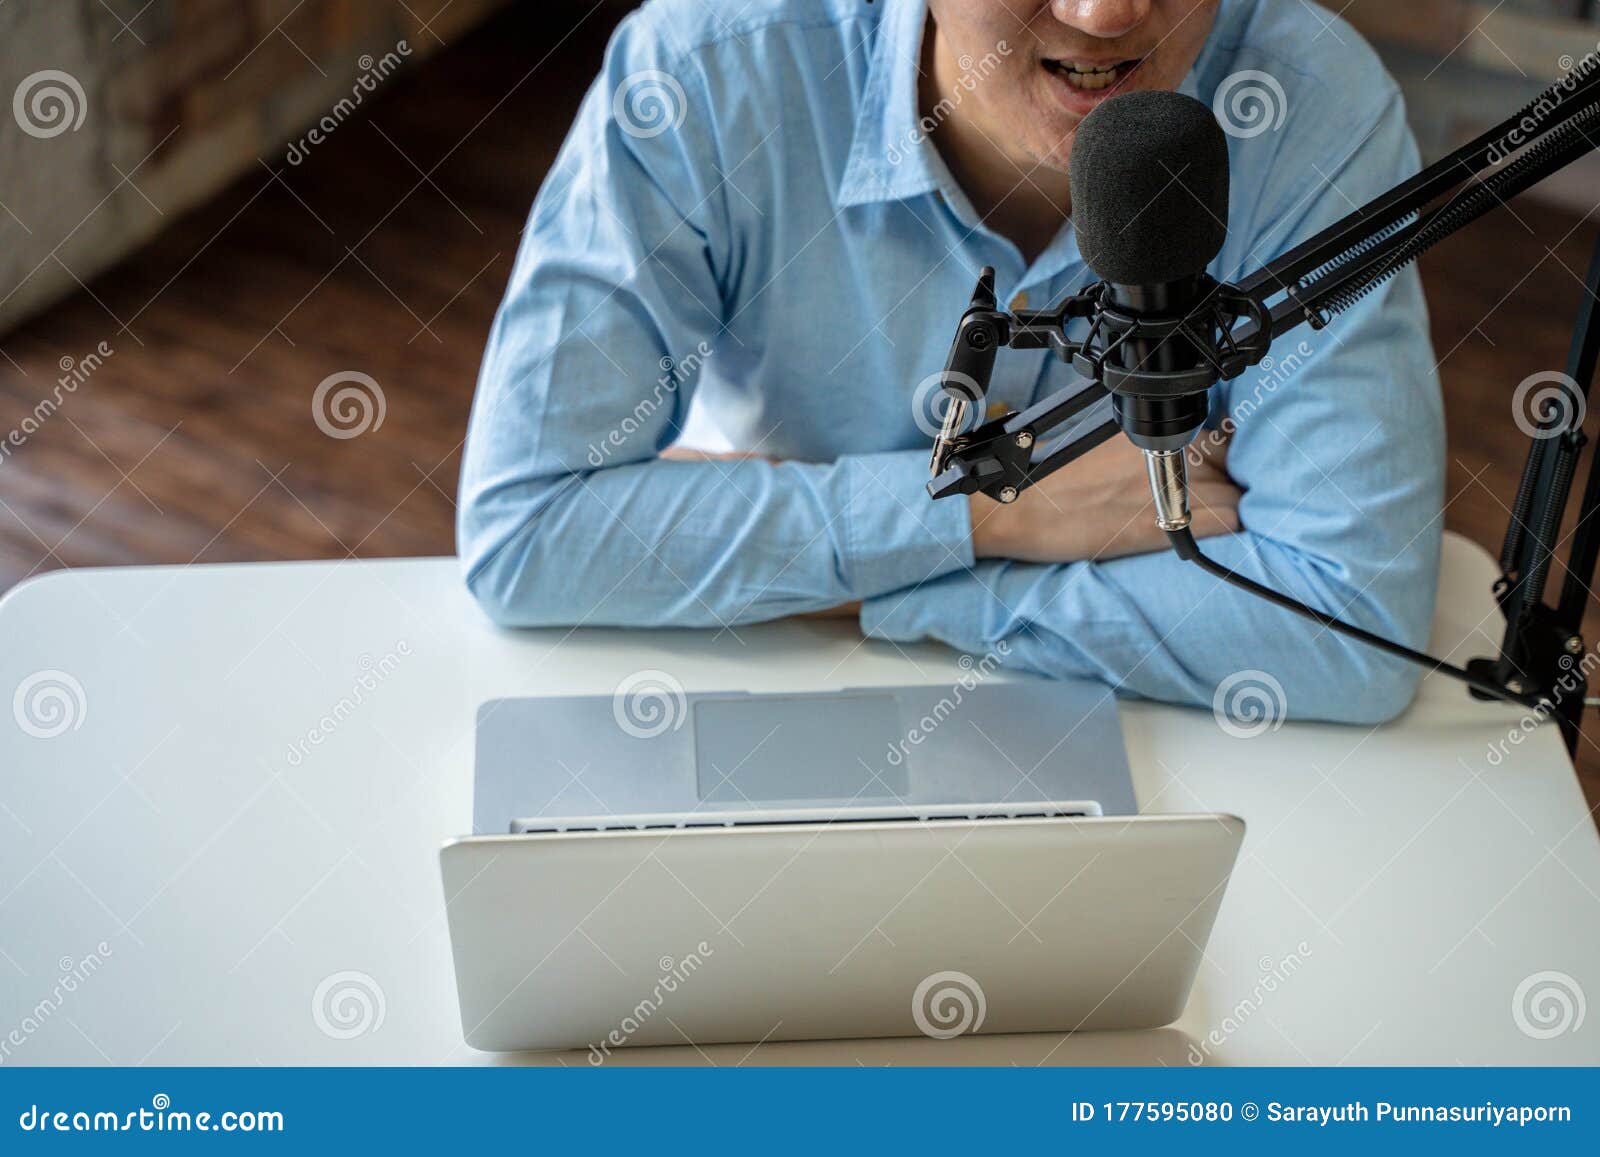 young adult businessman podcasting and recording talk show at home studio with computer laptop on table. the desk is